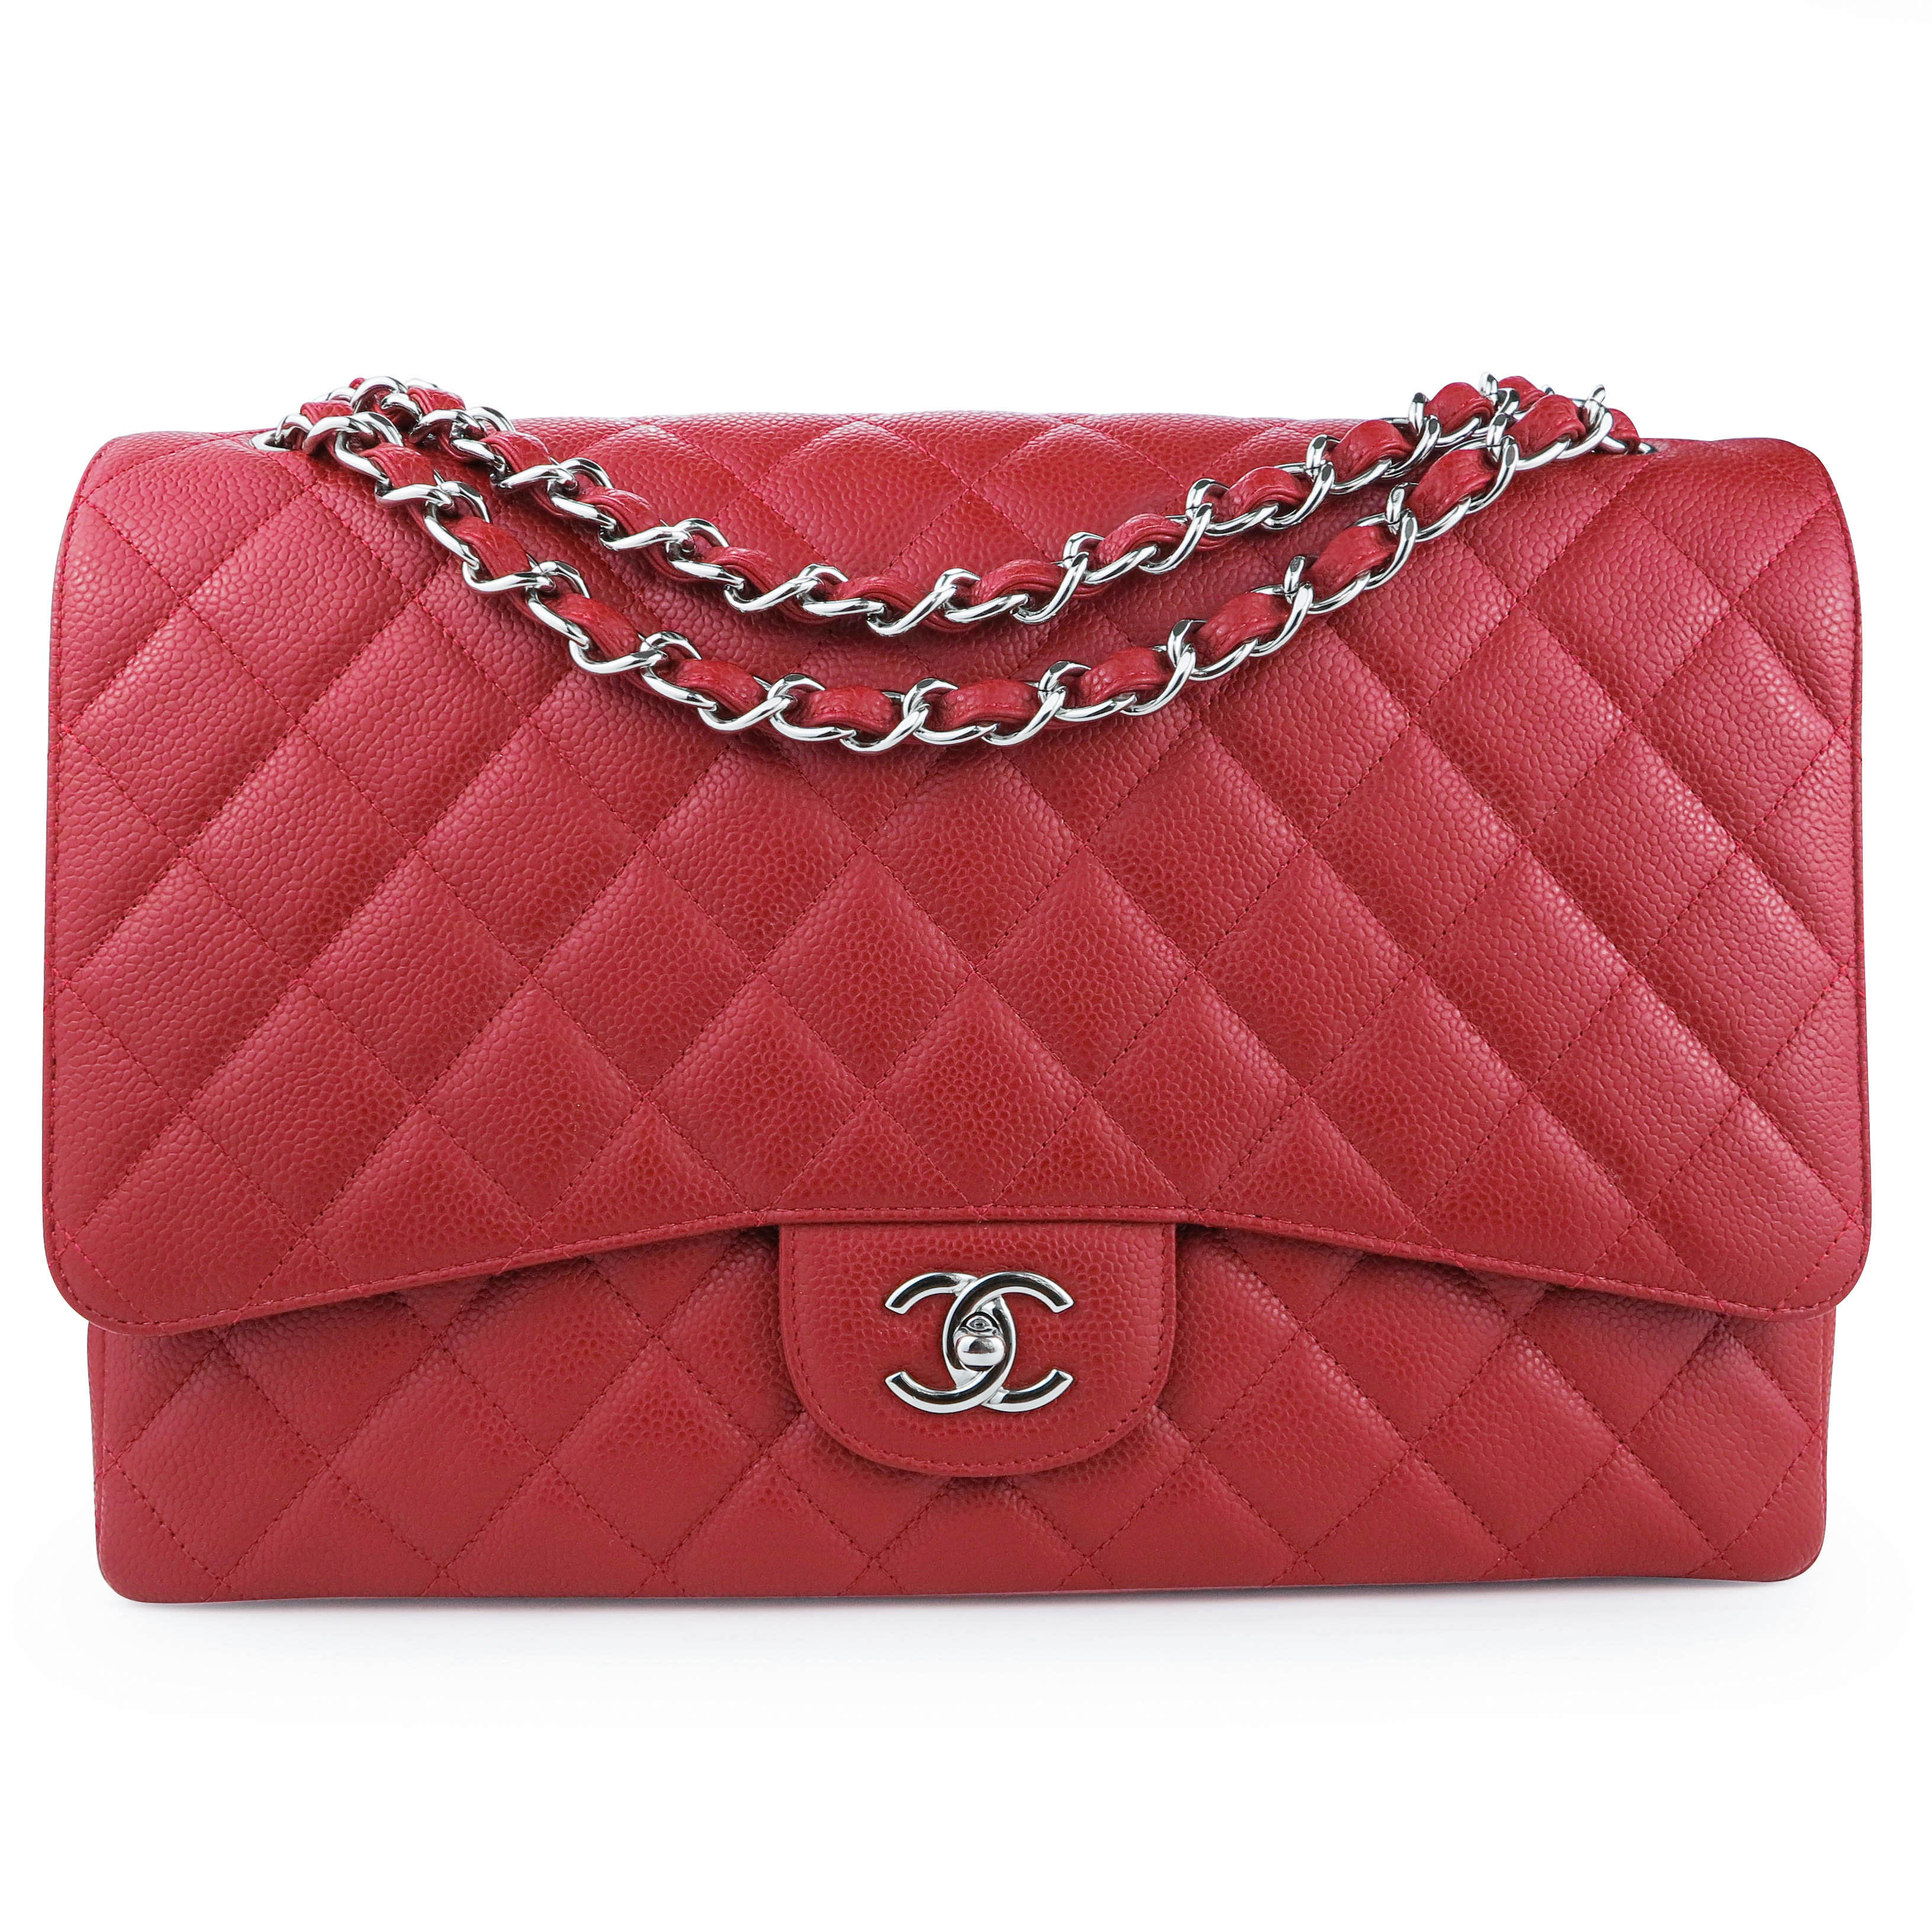 red chanel maxi flap